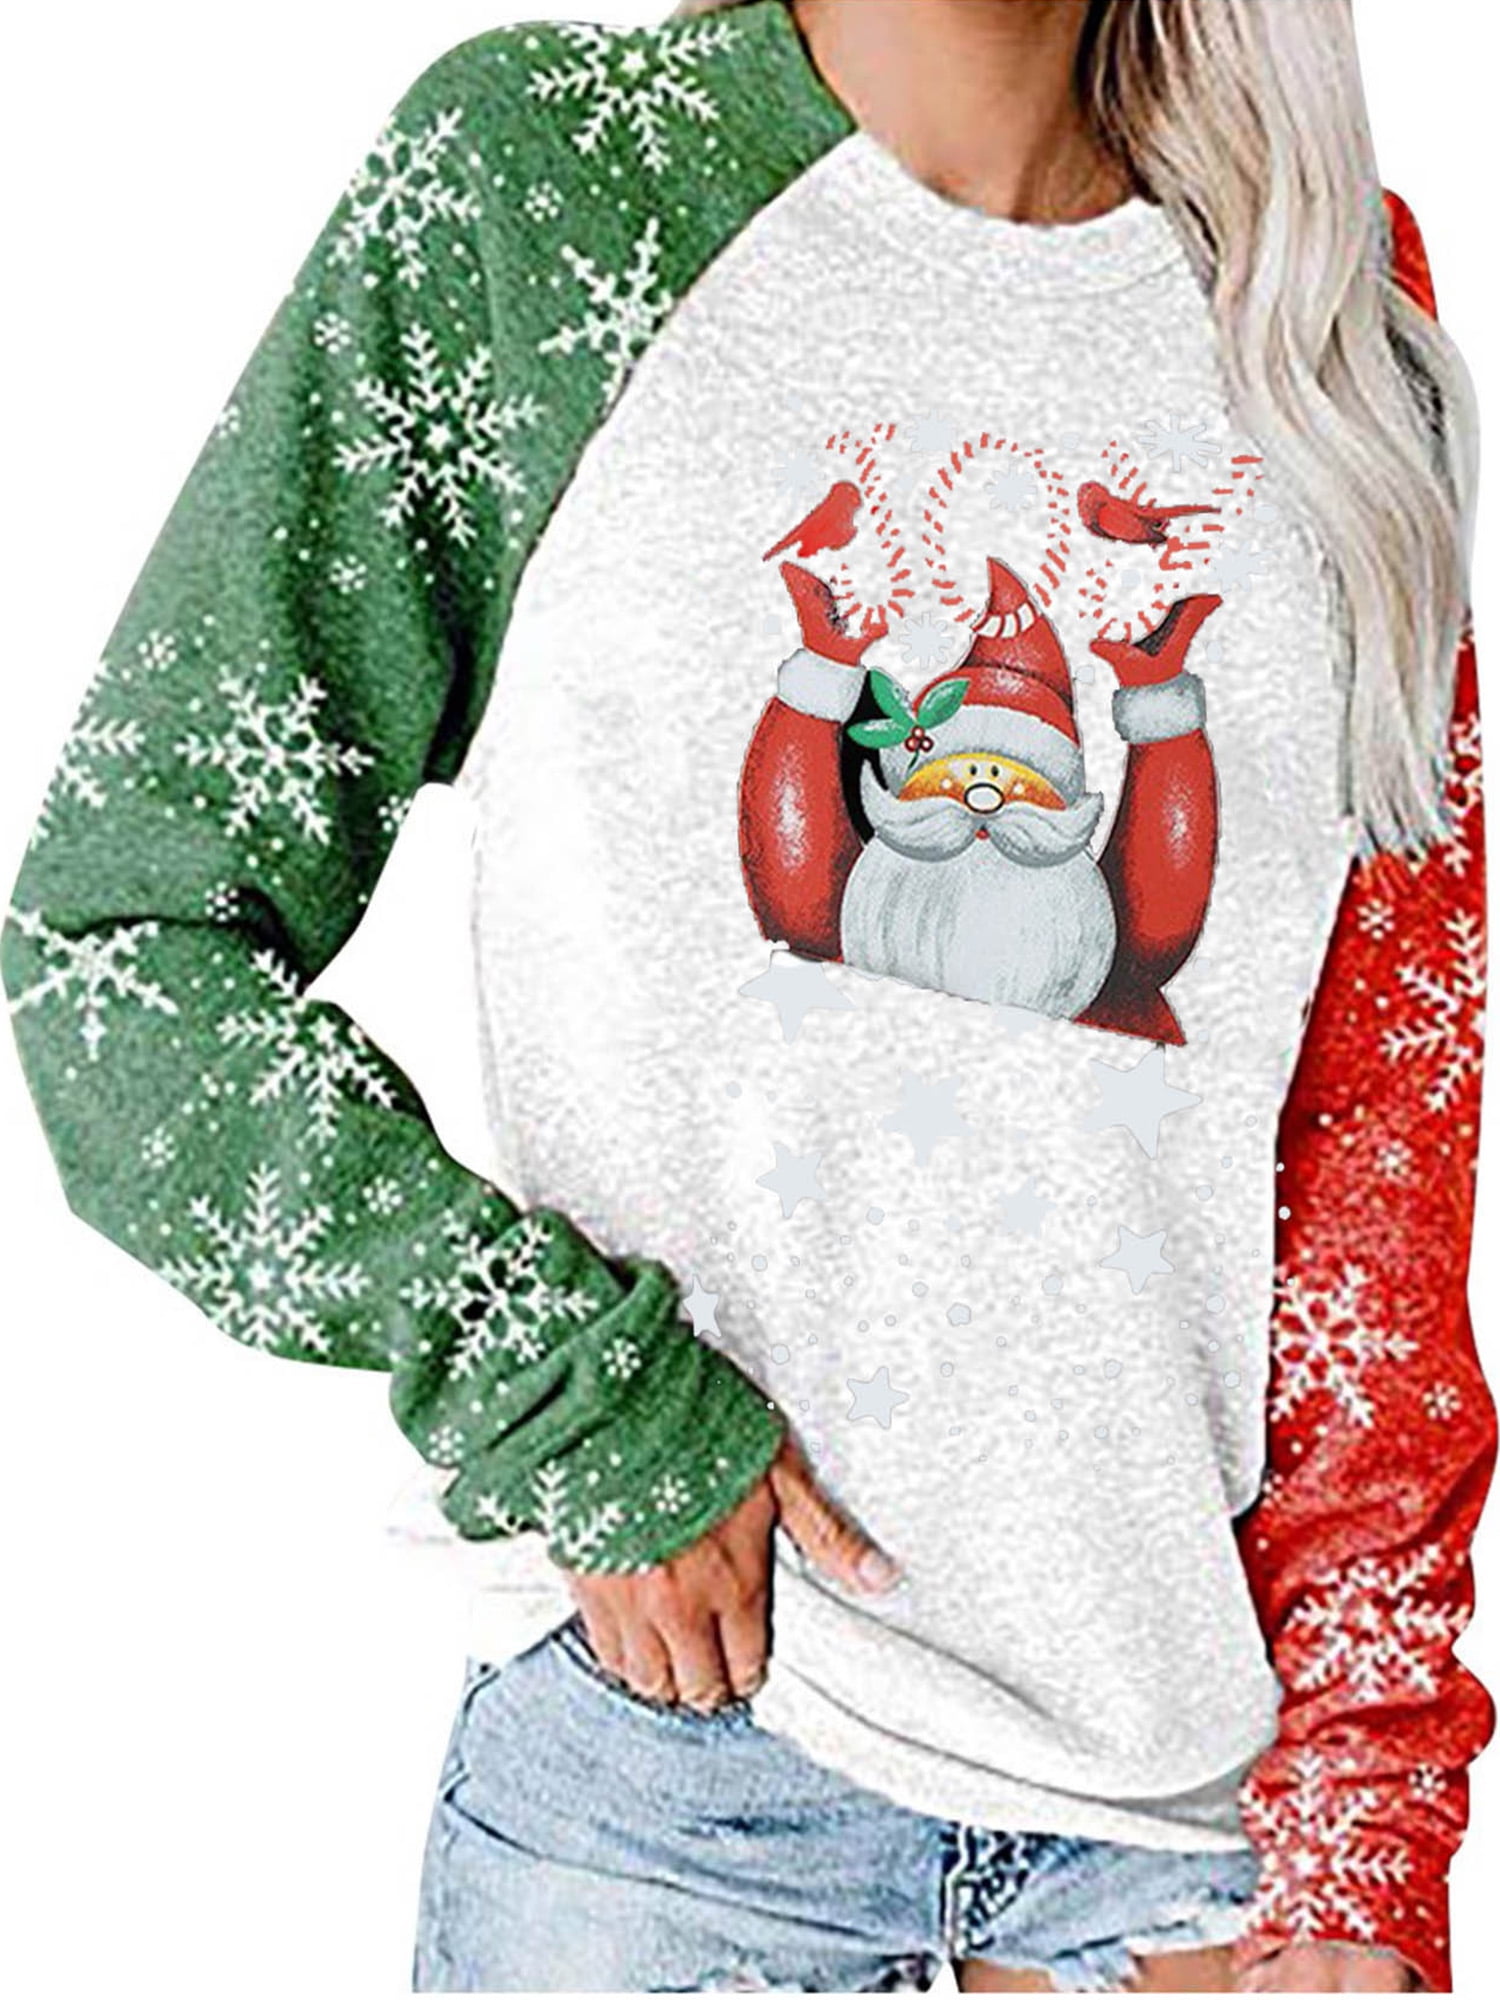 Womens Merry Christmas Snowflake Printed Sweatshirt Long Sleeve Cowl Neck Form Fitting Casual Tunic Top Blouse 